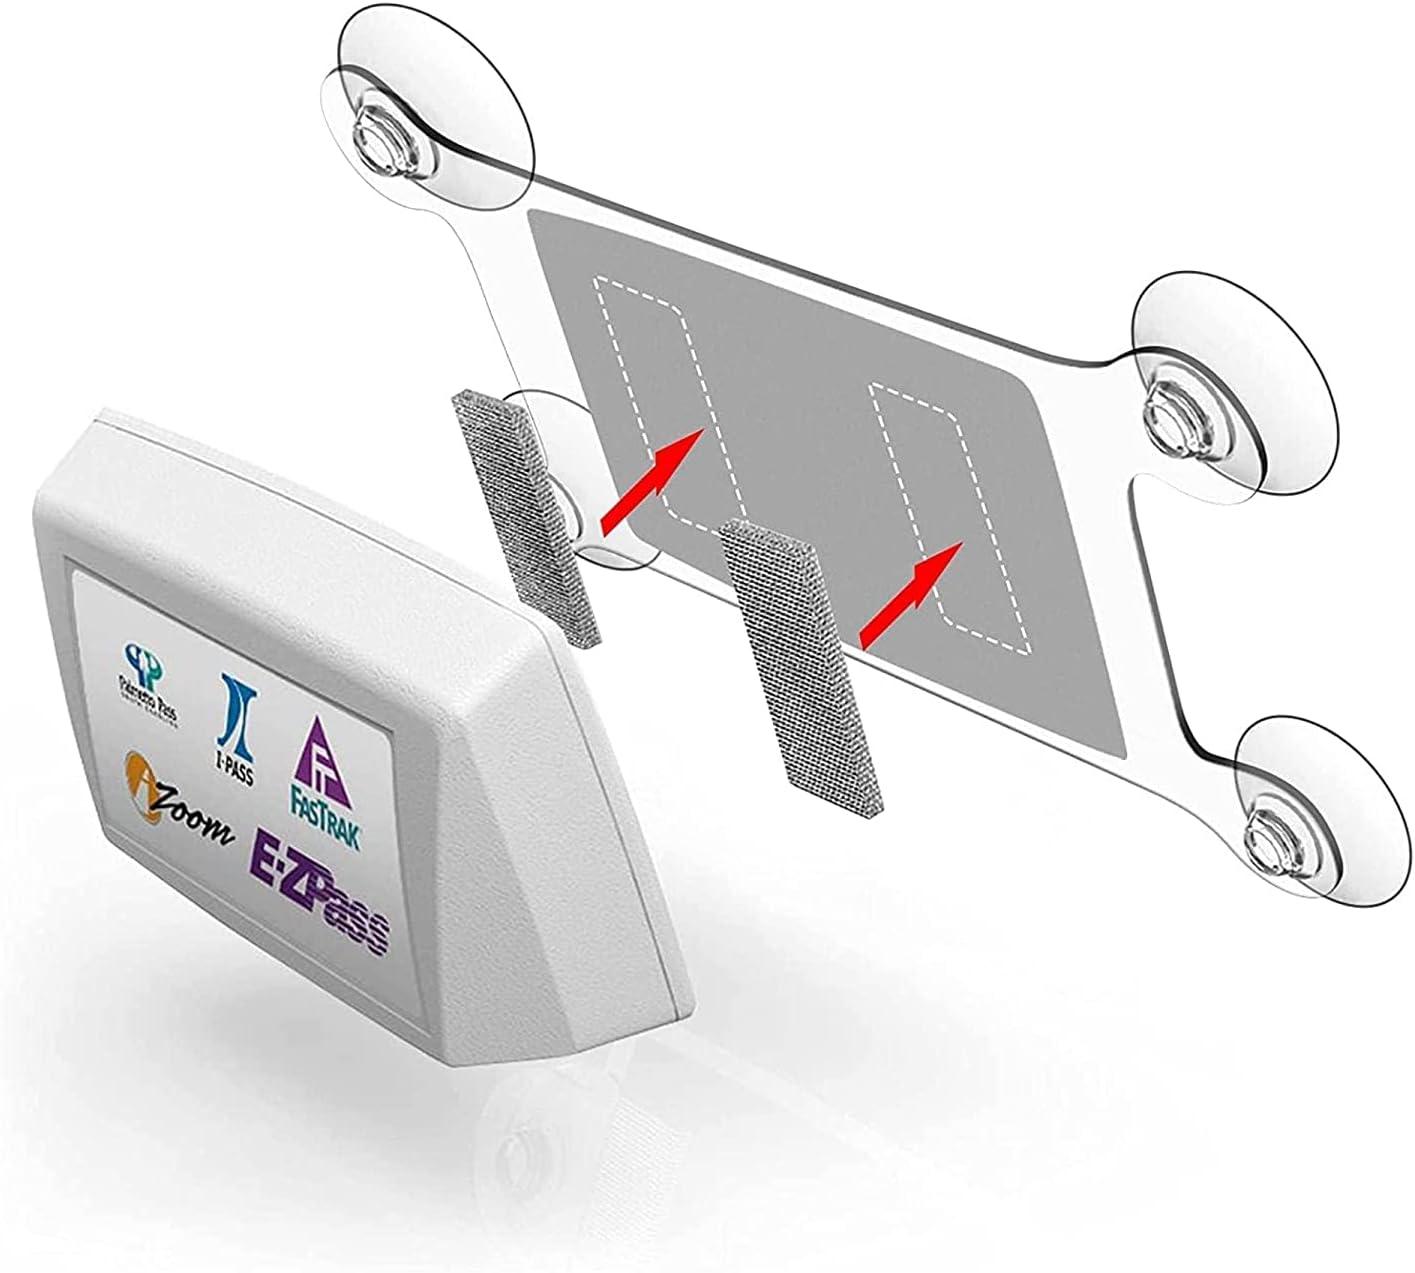 EZ Pass IPass Replacement Tag Holder Mounting Strips 3M Tape Fasteners. 1/2  Inch x 1 Foot.